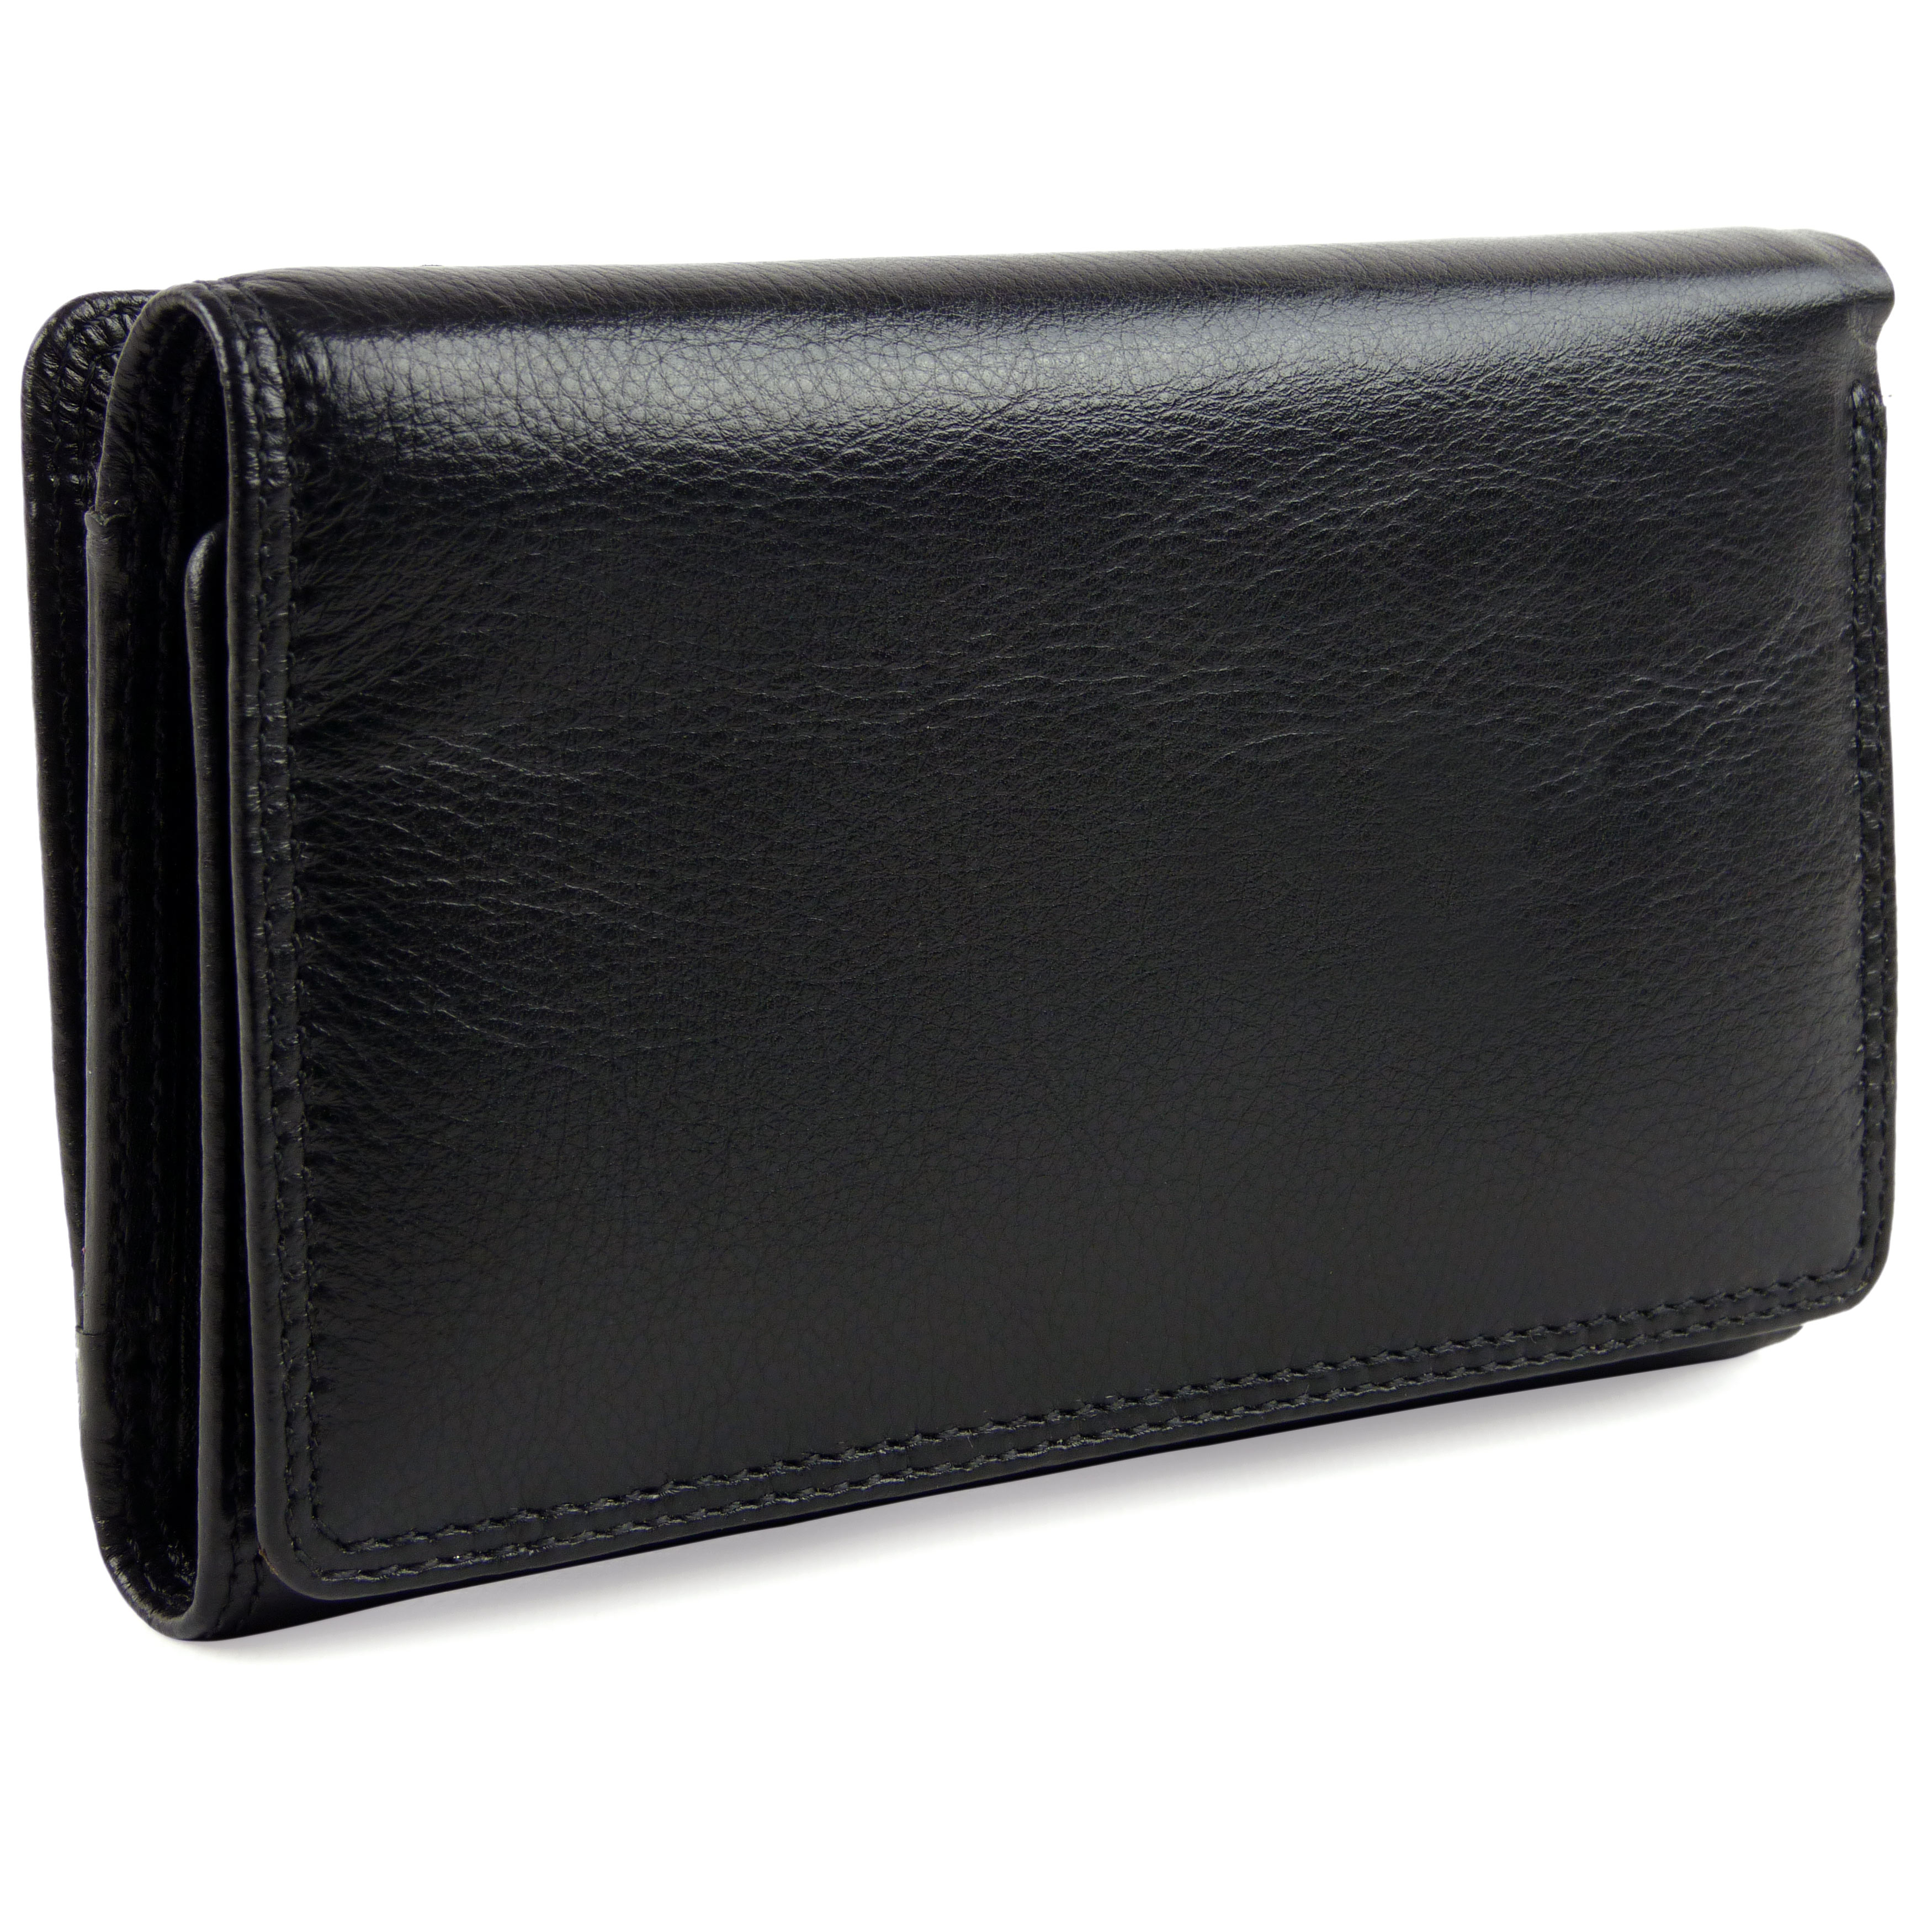 Ladies Leather Medium Flap Over Purse/Wallet by Visconti Heritage Gift ...